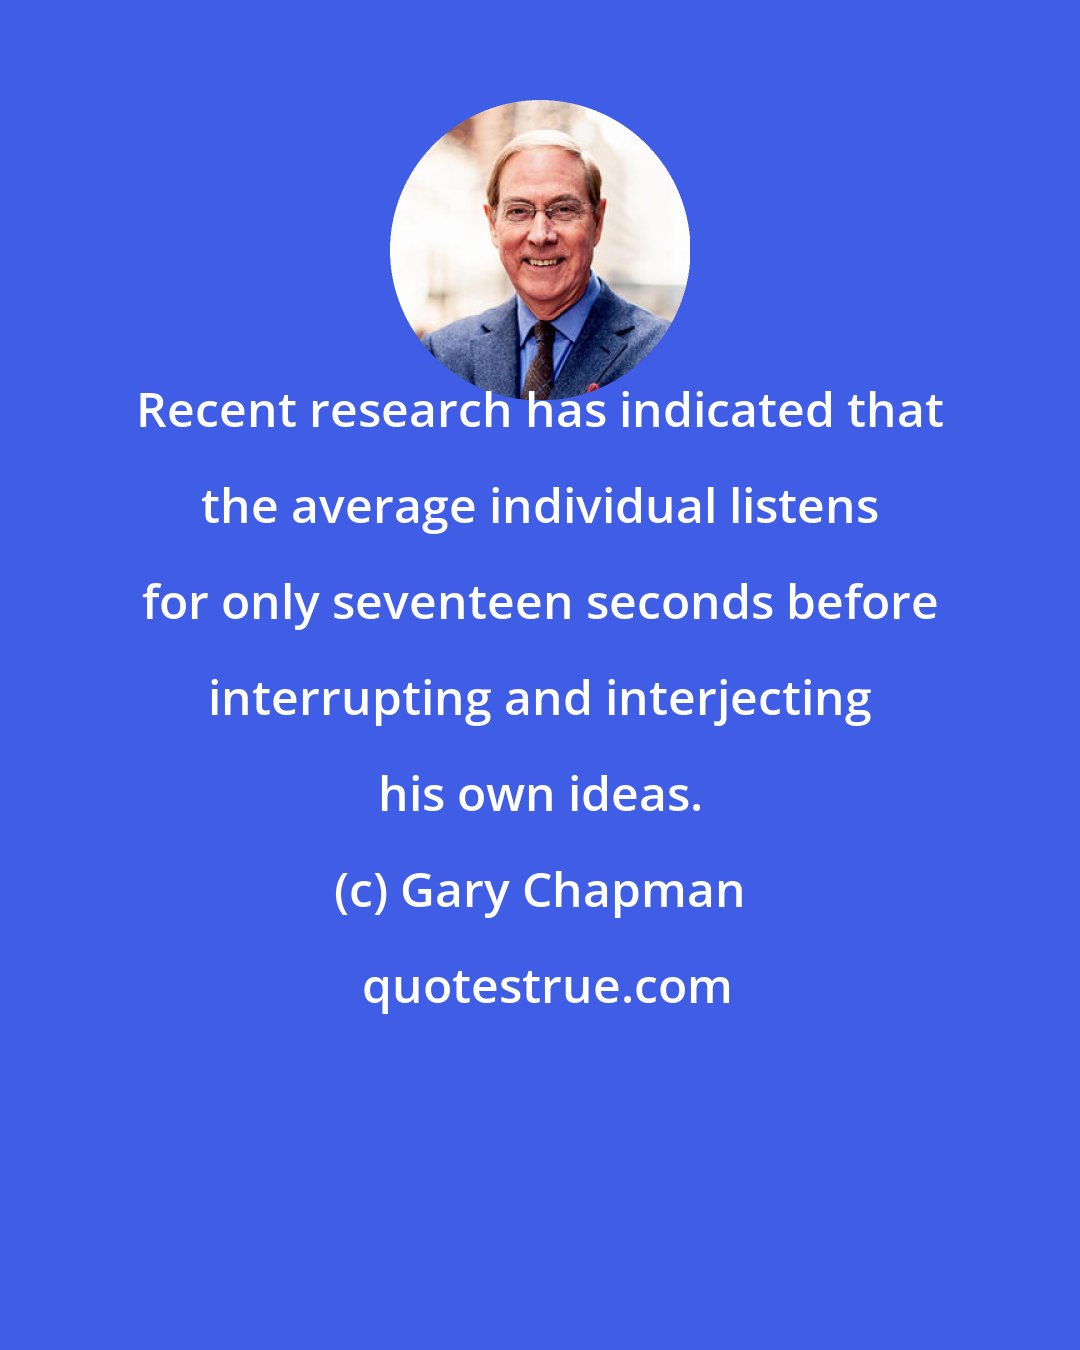 Gary Chapman: Recent research has indicated that the average individual listens for only seventeen seconds before interrupting and interjecting his own ideas.